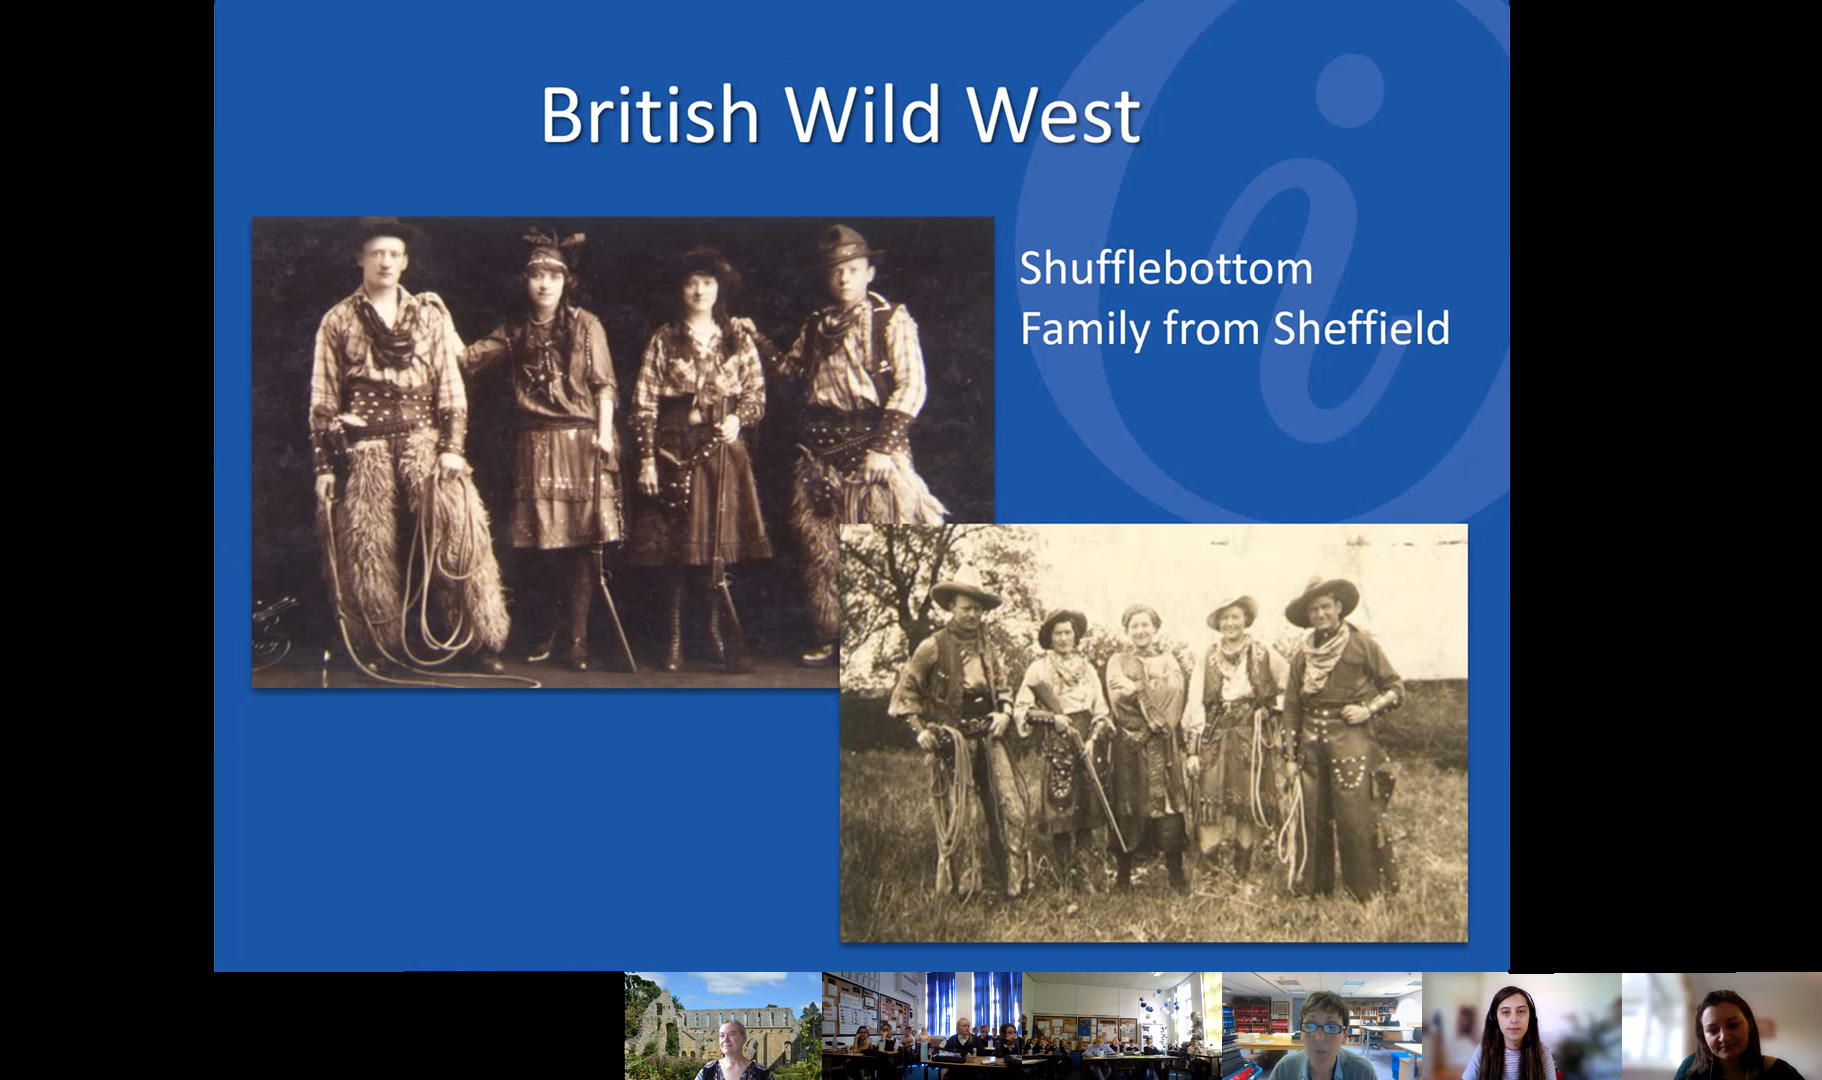 Presentation slide "British Wild West" showing the Shufflebottom Family from Sheffield in two photos. The photos show men and women dressed in Wild West clothing, with cowboy hats and studded leather, fur and ropes.